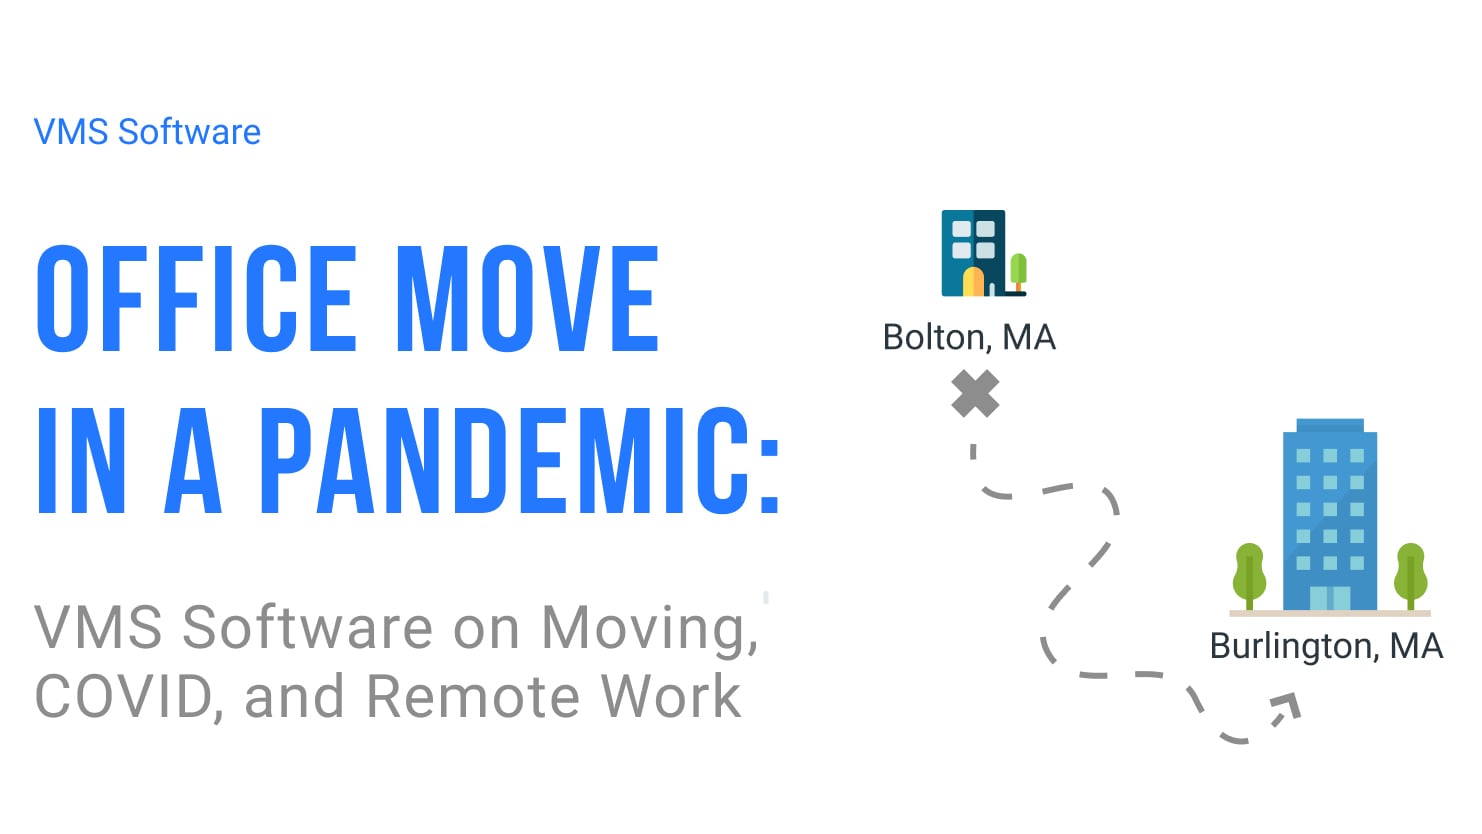 Office Move in a Pandemic. VMS Software on Moving, COVID, and Remote Work